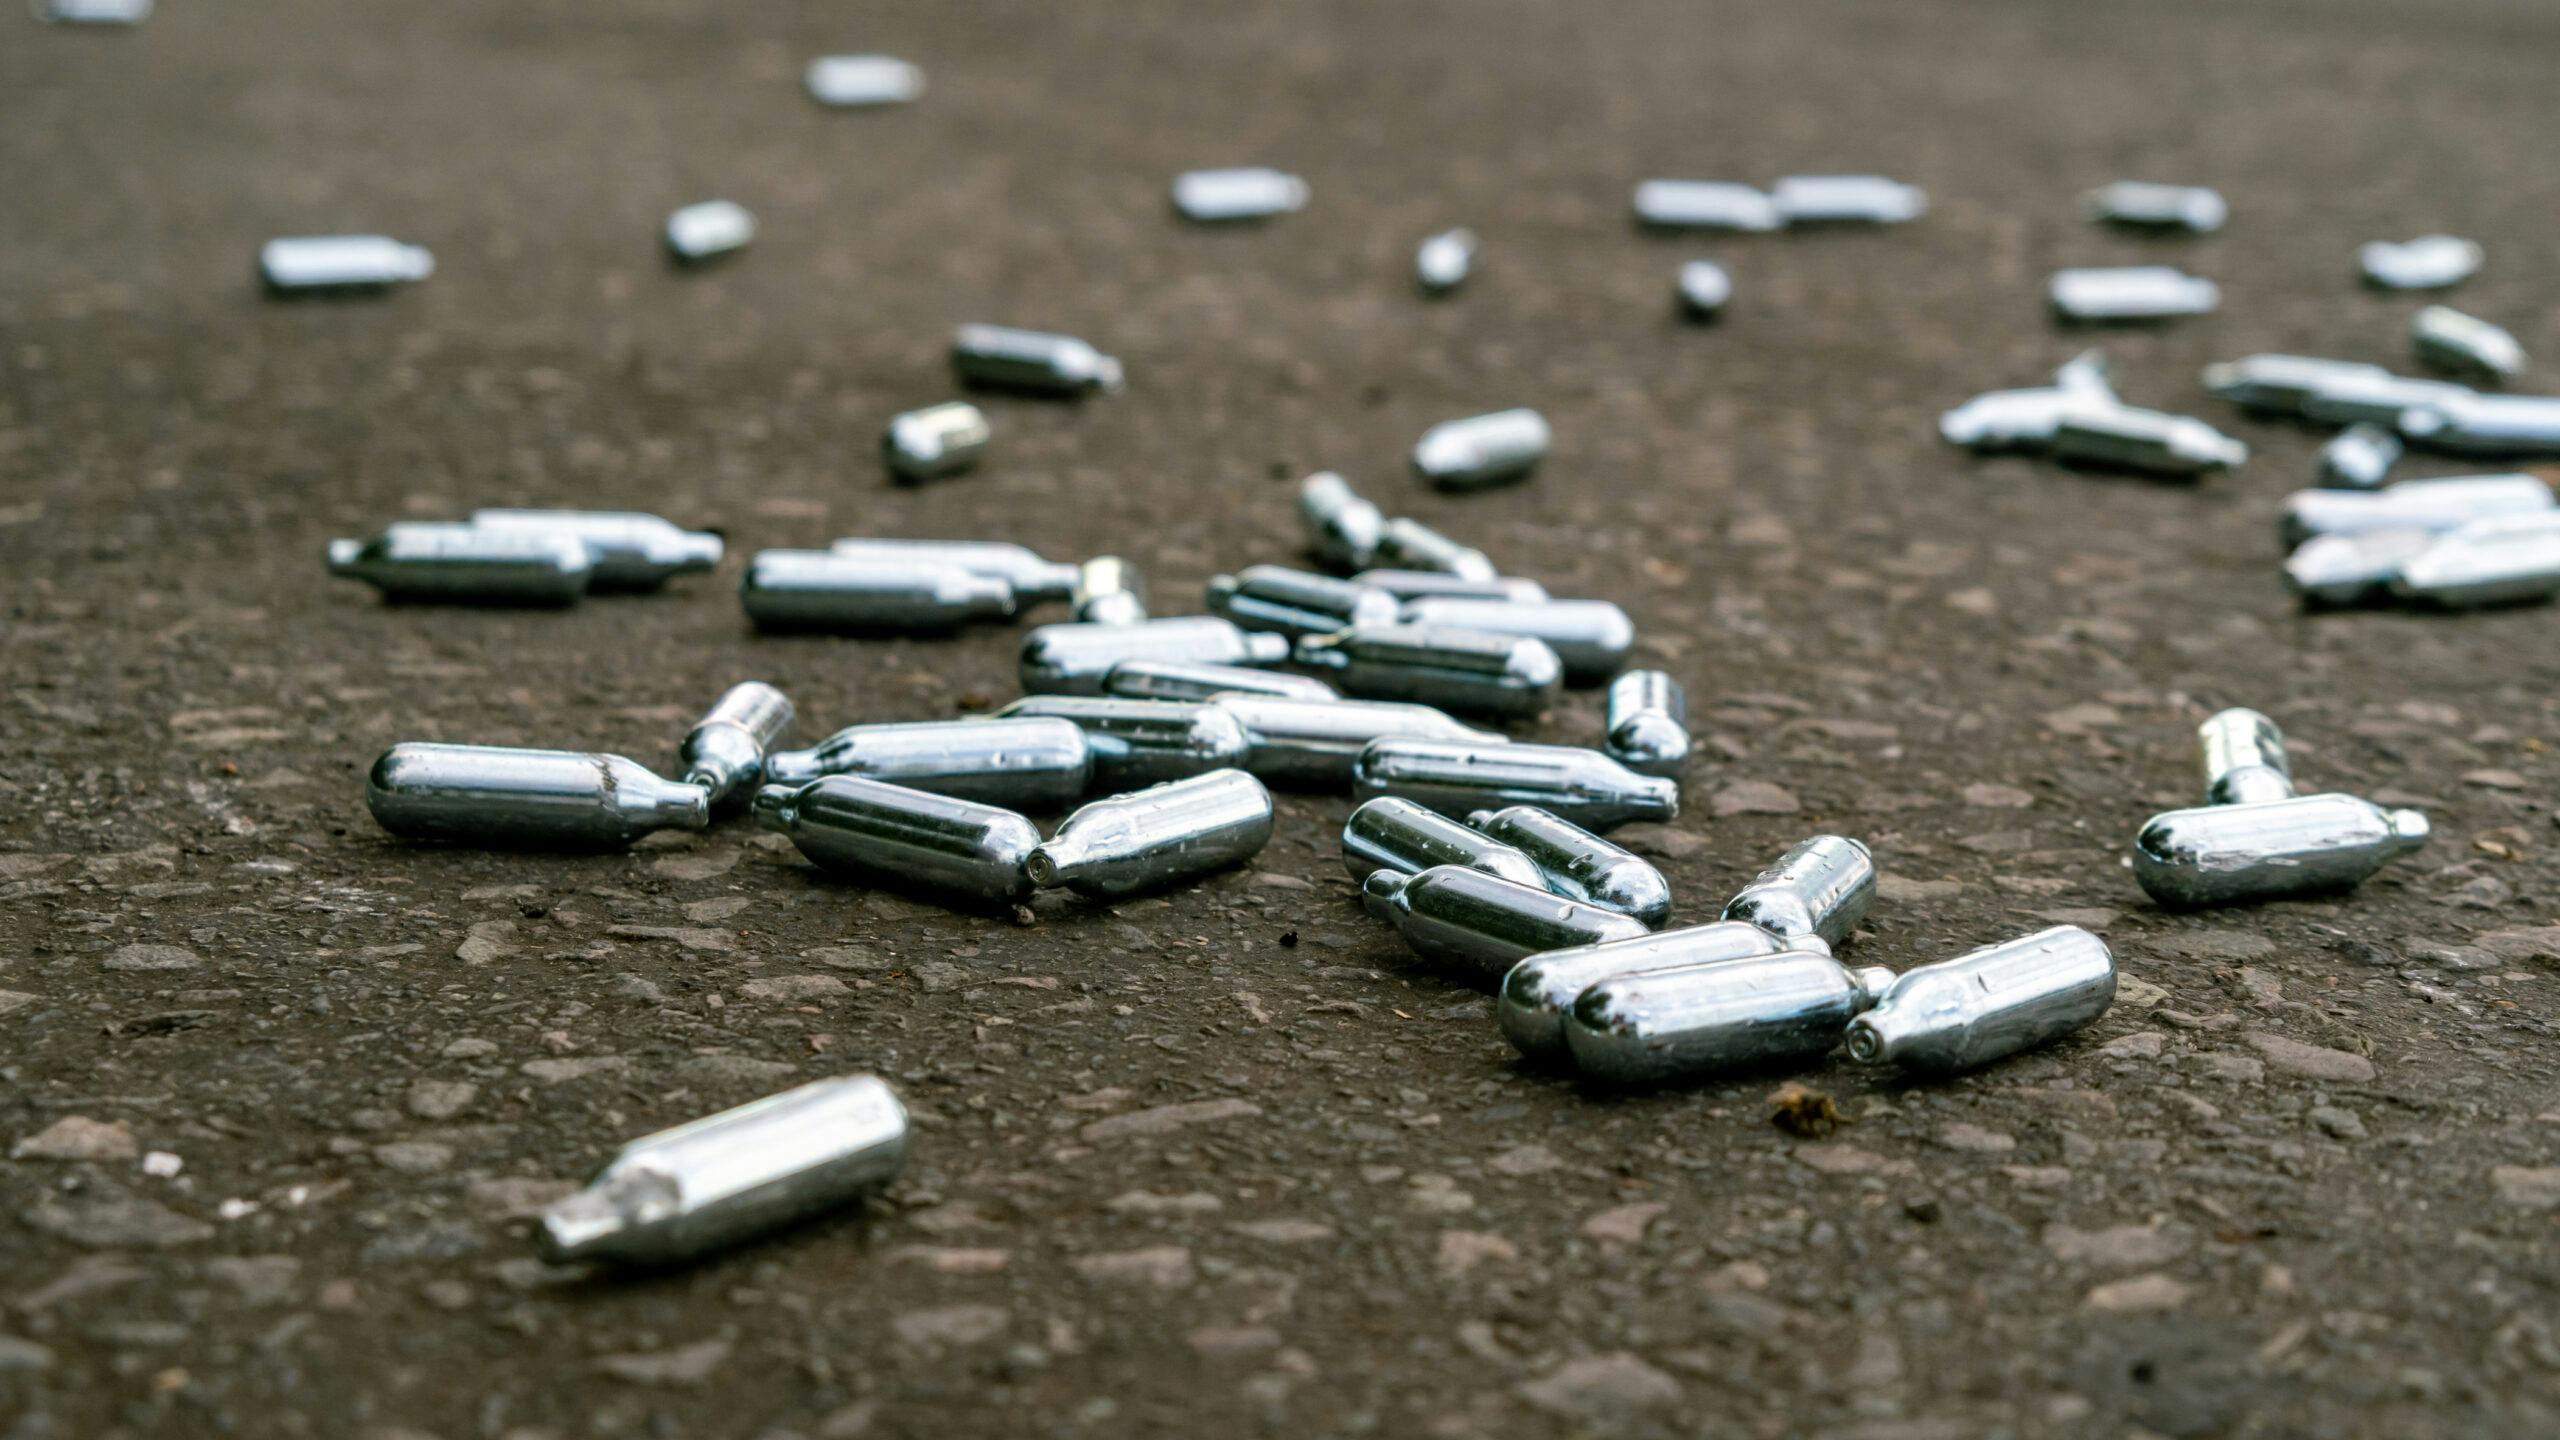 empty nitrous oxide canisters on ground scattered